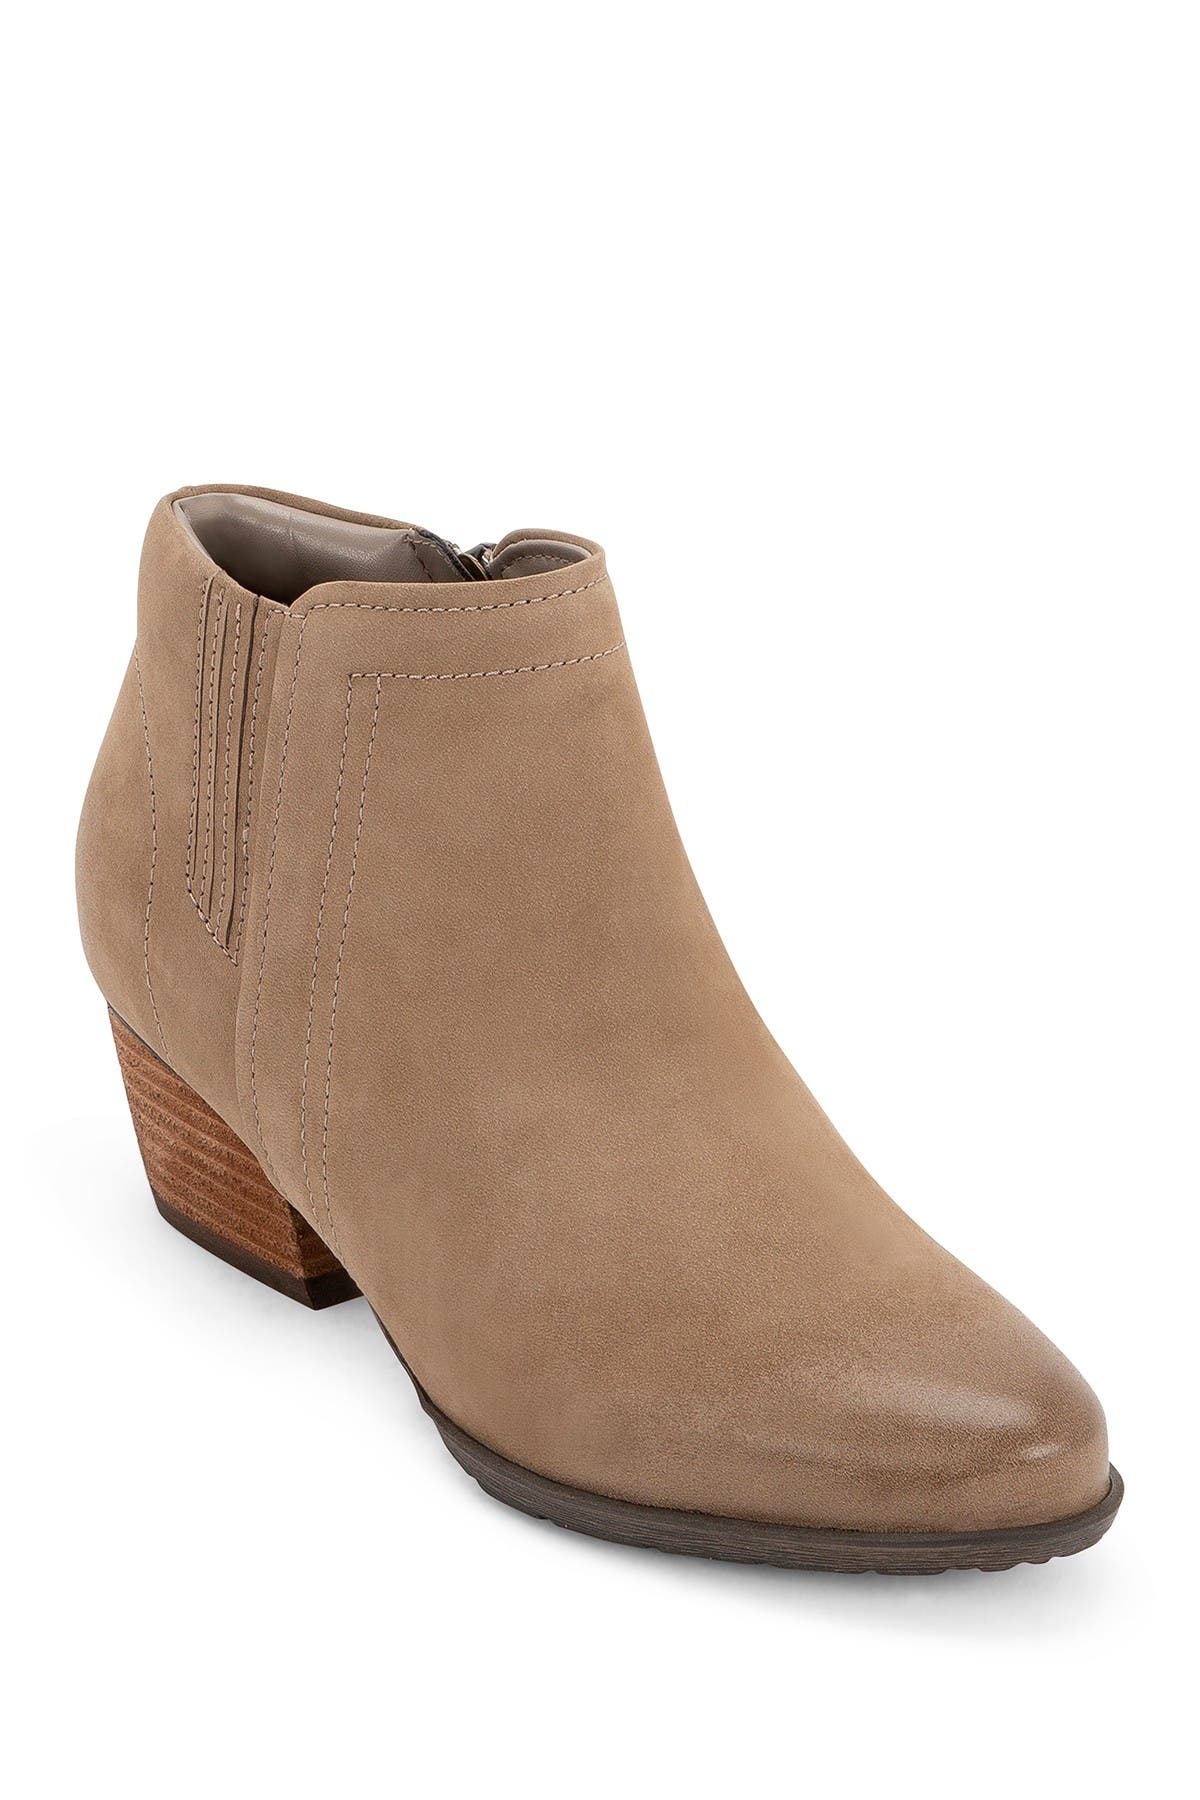 nordstrom rack boots womens